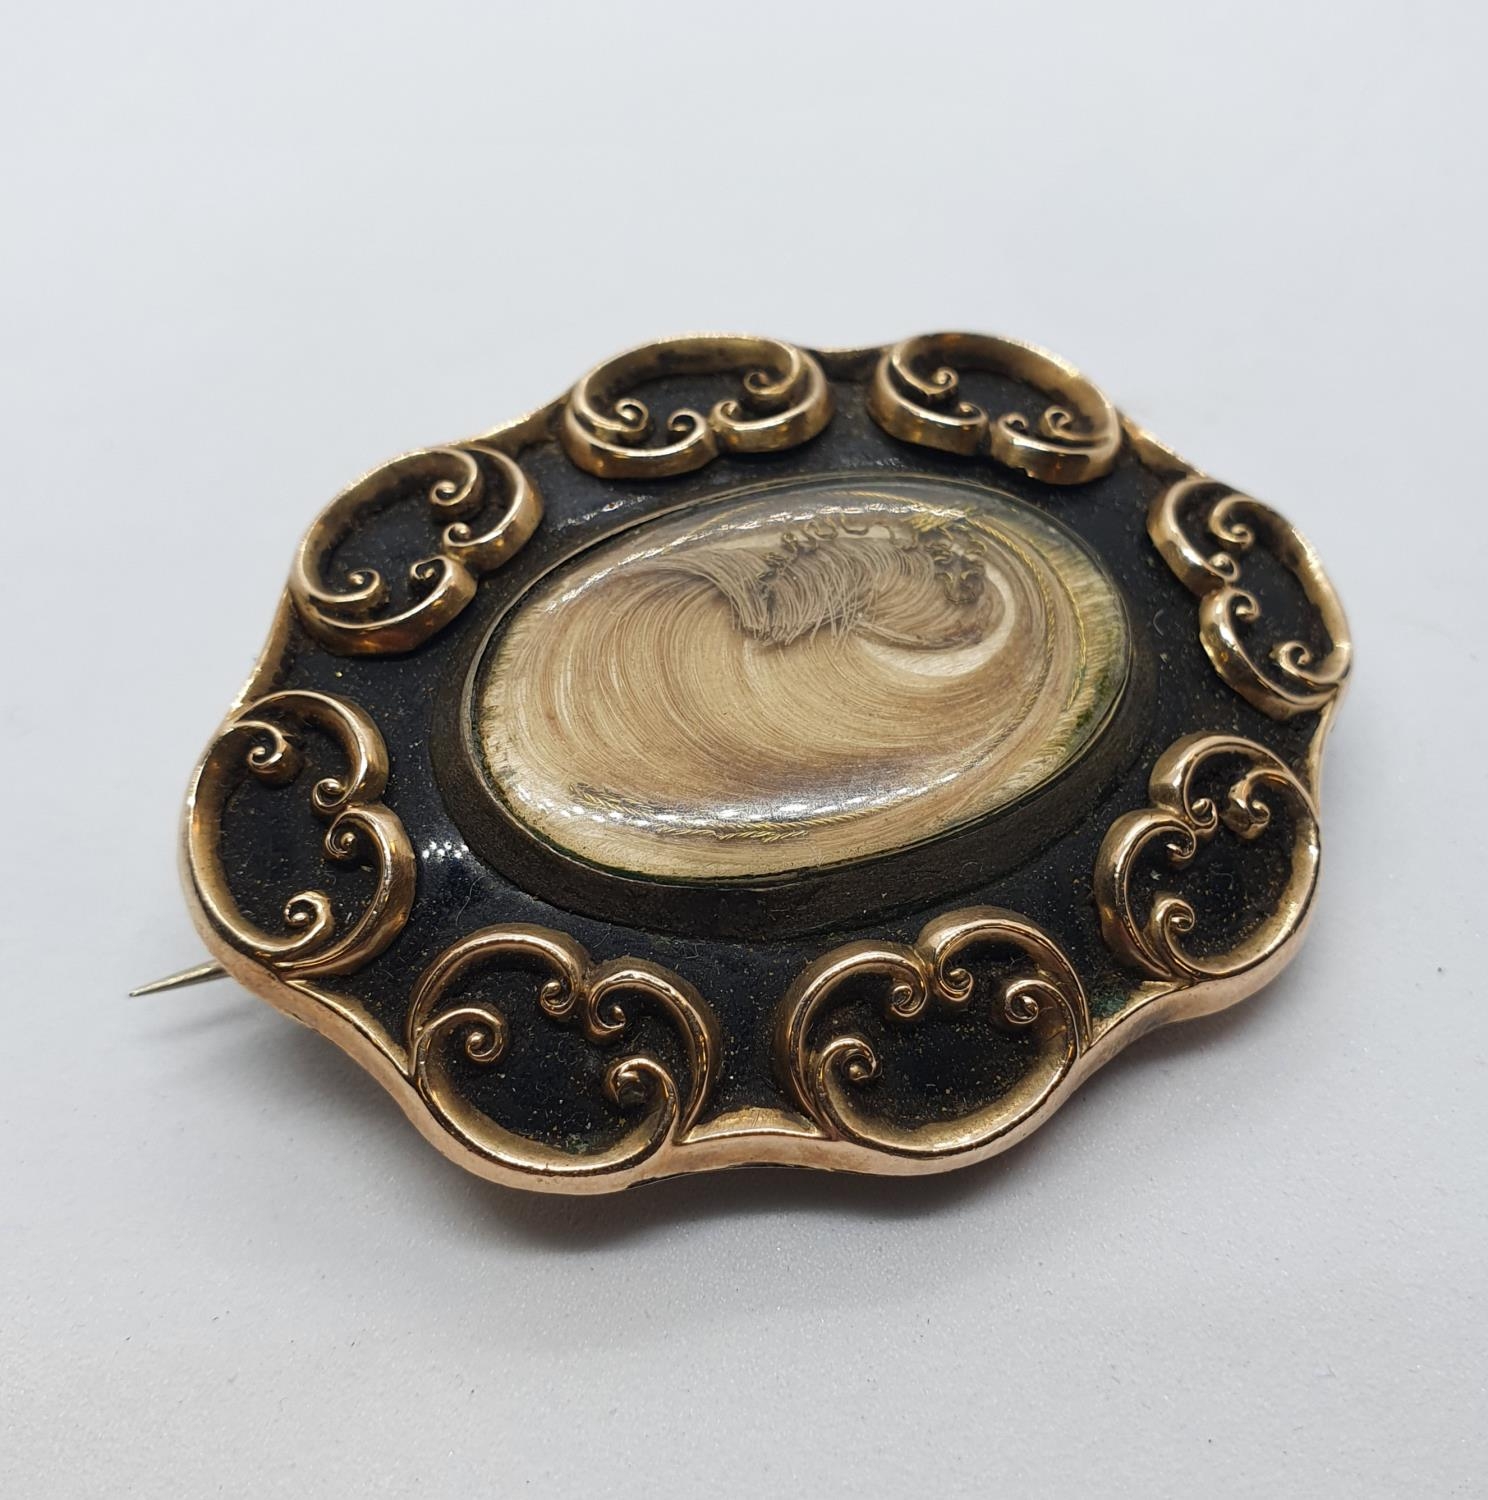 A Victorian yellow coloured metal and black enamel memorial brooch, inset with a lock of hair All in